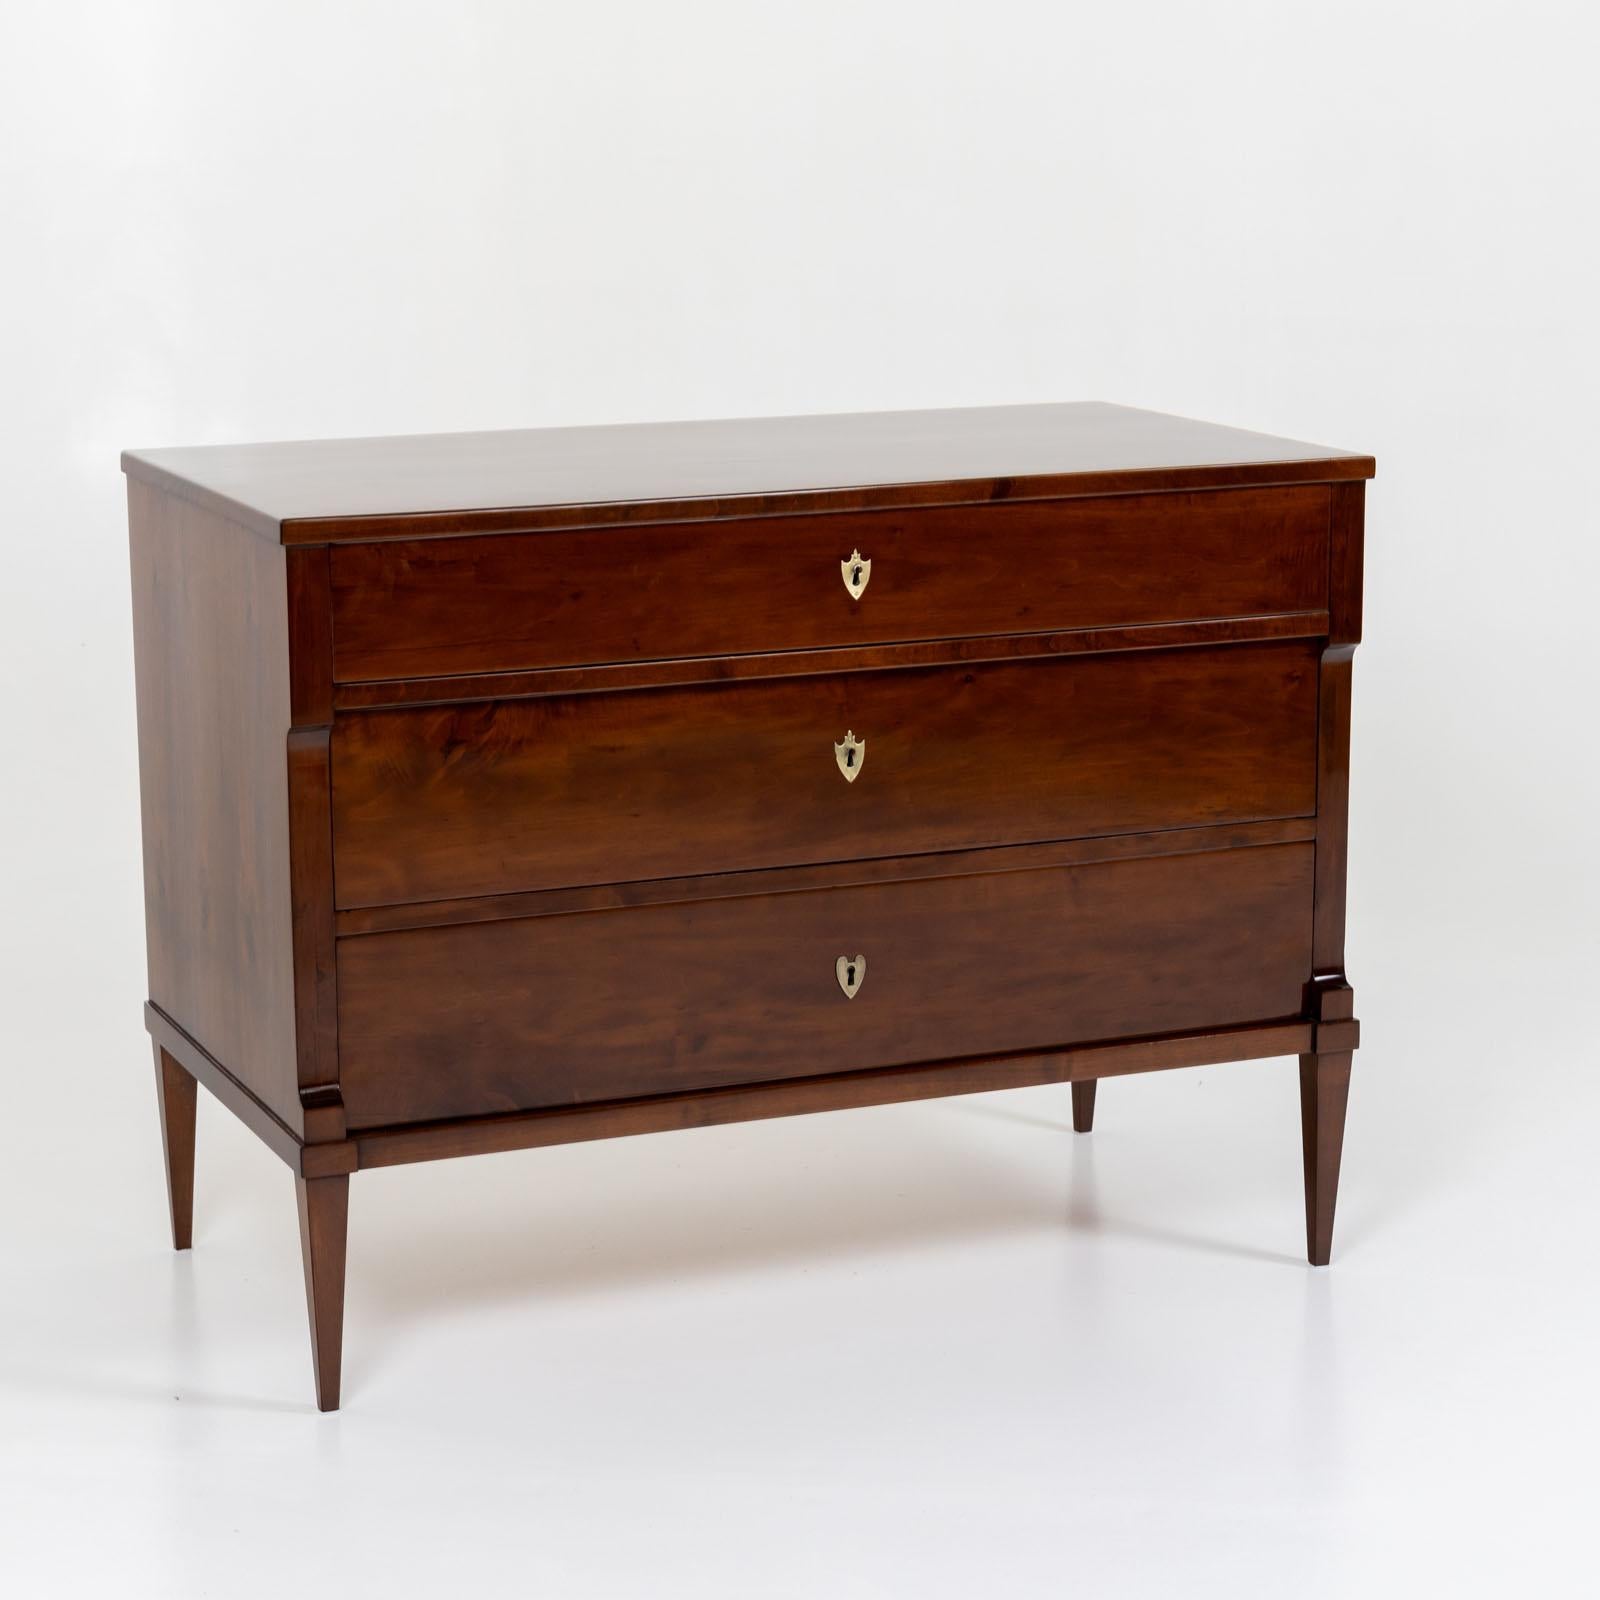 Neoclassical chest of drawers with three drawers and brass escutcheons. The chest of drawers is made of walnut and stands on elegant square tapered legs. The top drawer is slightly shallower than the lower drawers. The pilaster strips are